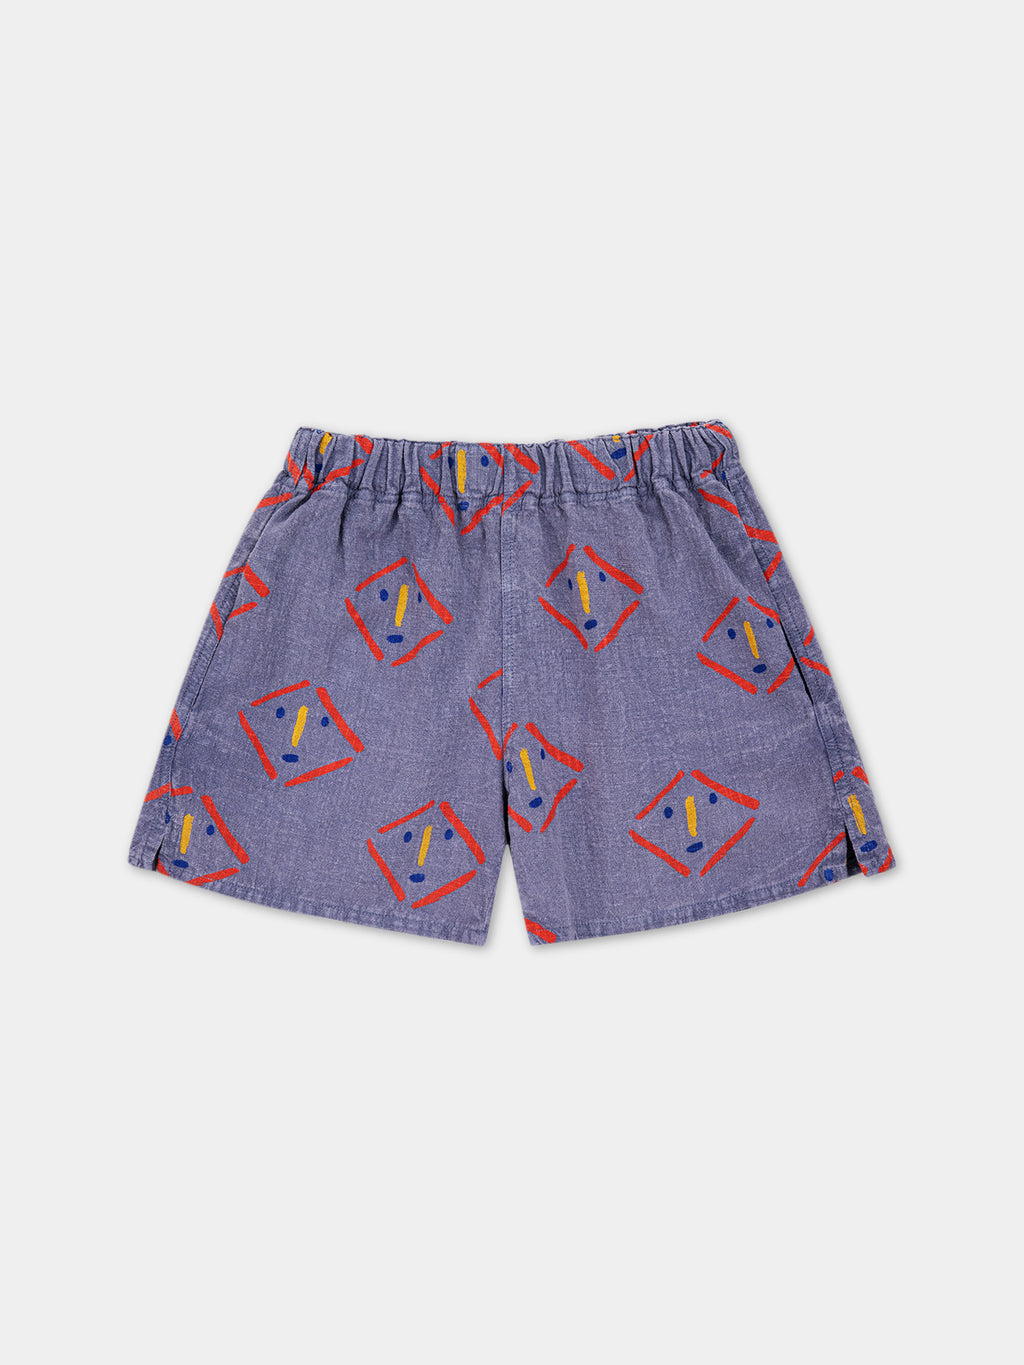 Purple shorts for kids